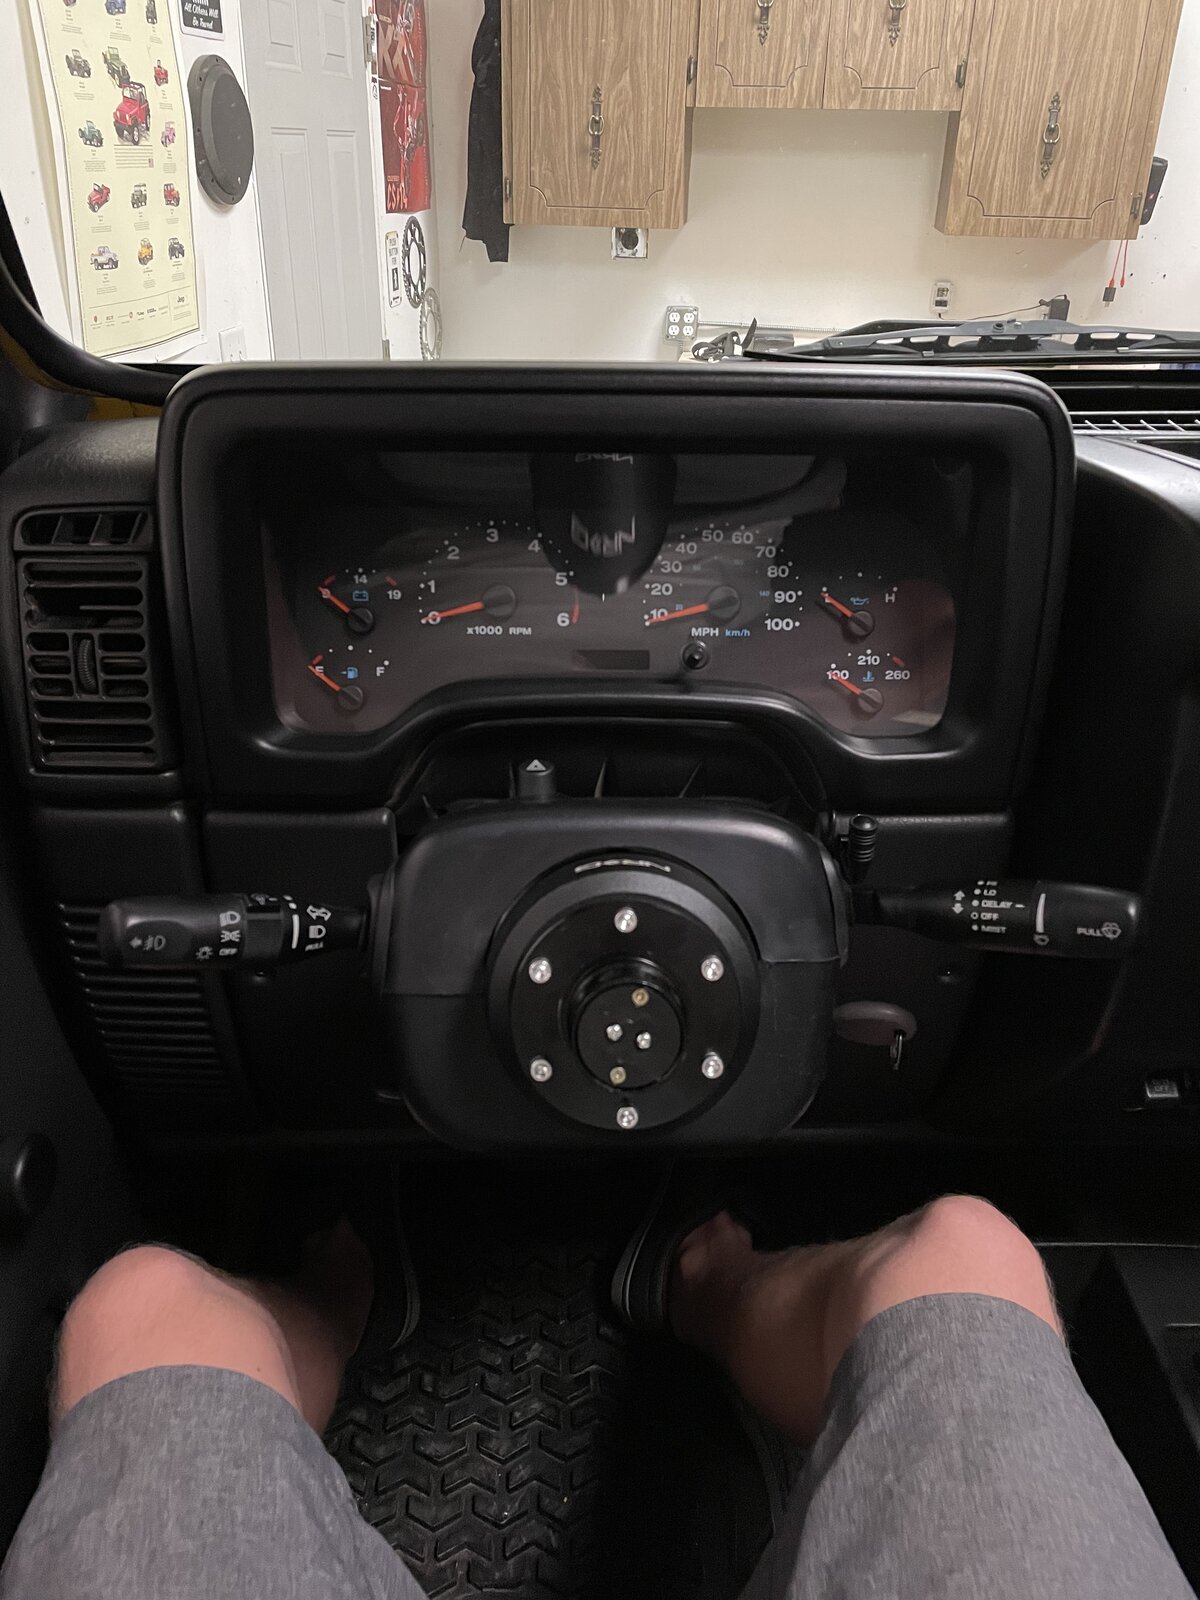 Steering Wheel and Quick Release hub | Jeep Wrangler TJ Forum